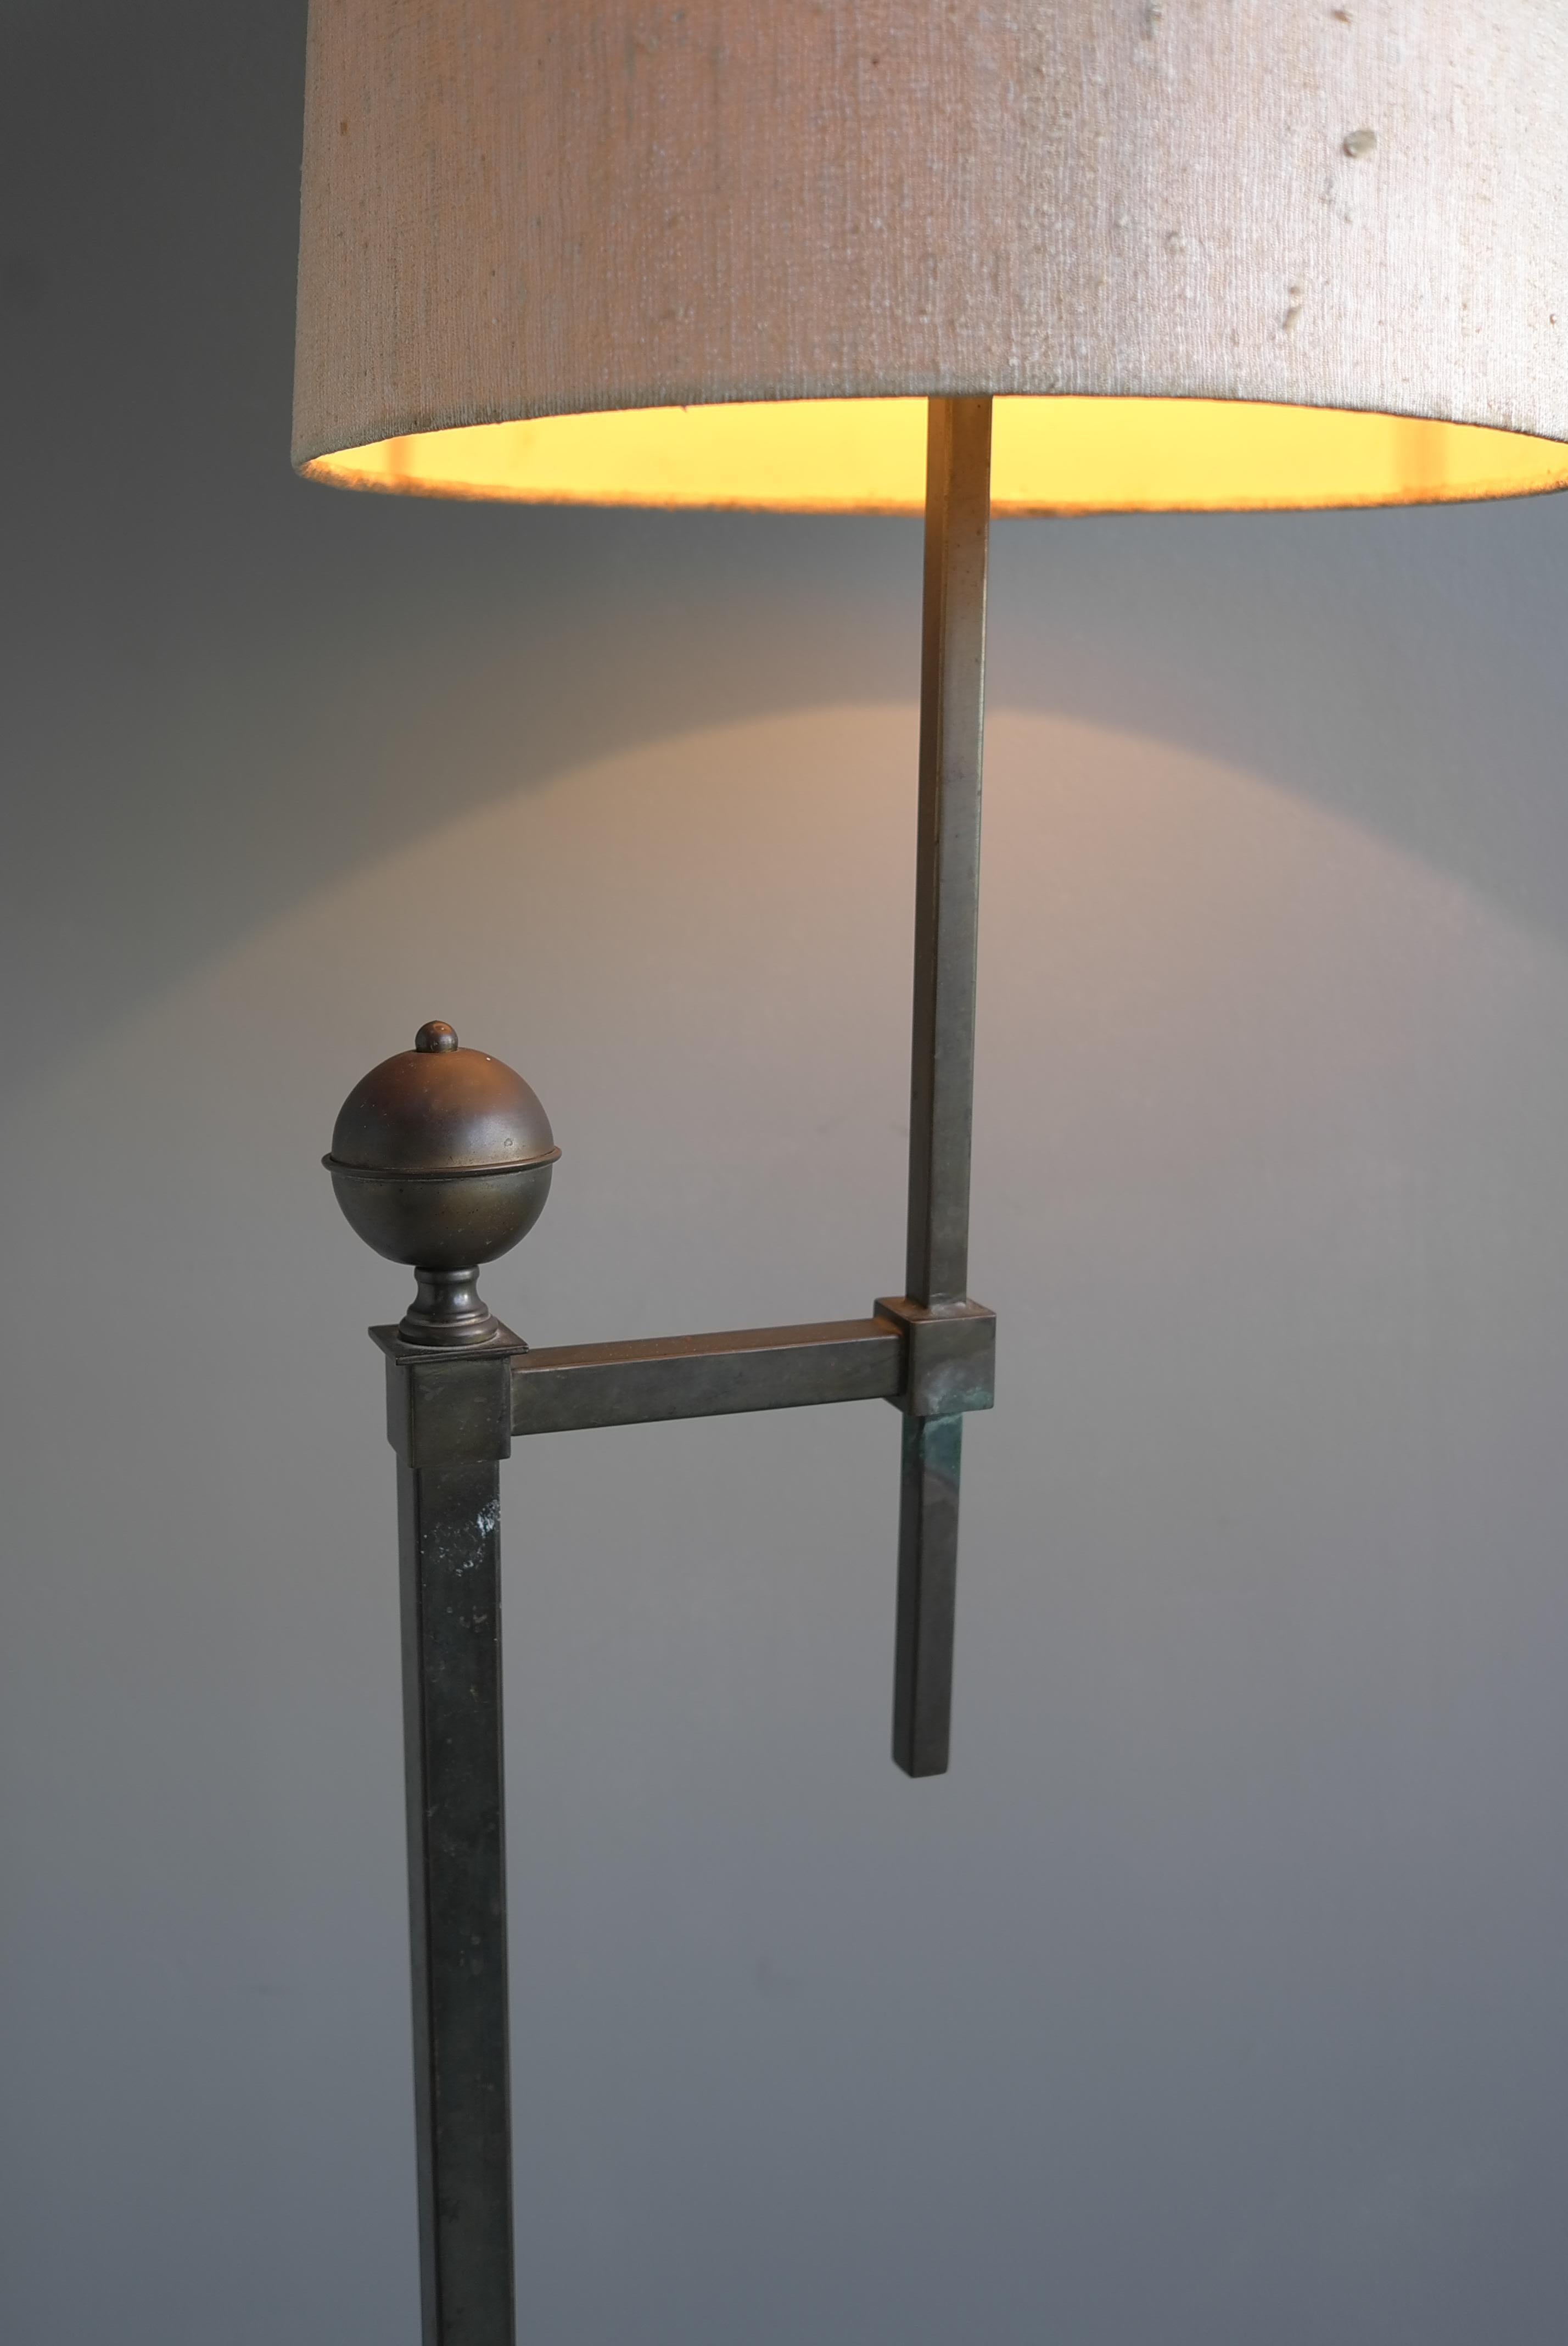 French Mid-Century Modern Copper and steel Patina Floor lamp 1950's For Sale 2